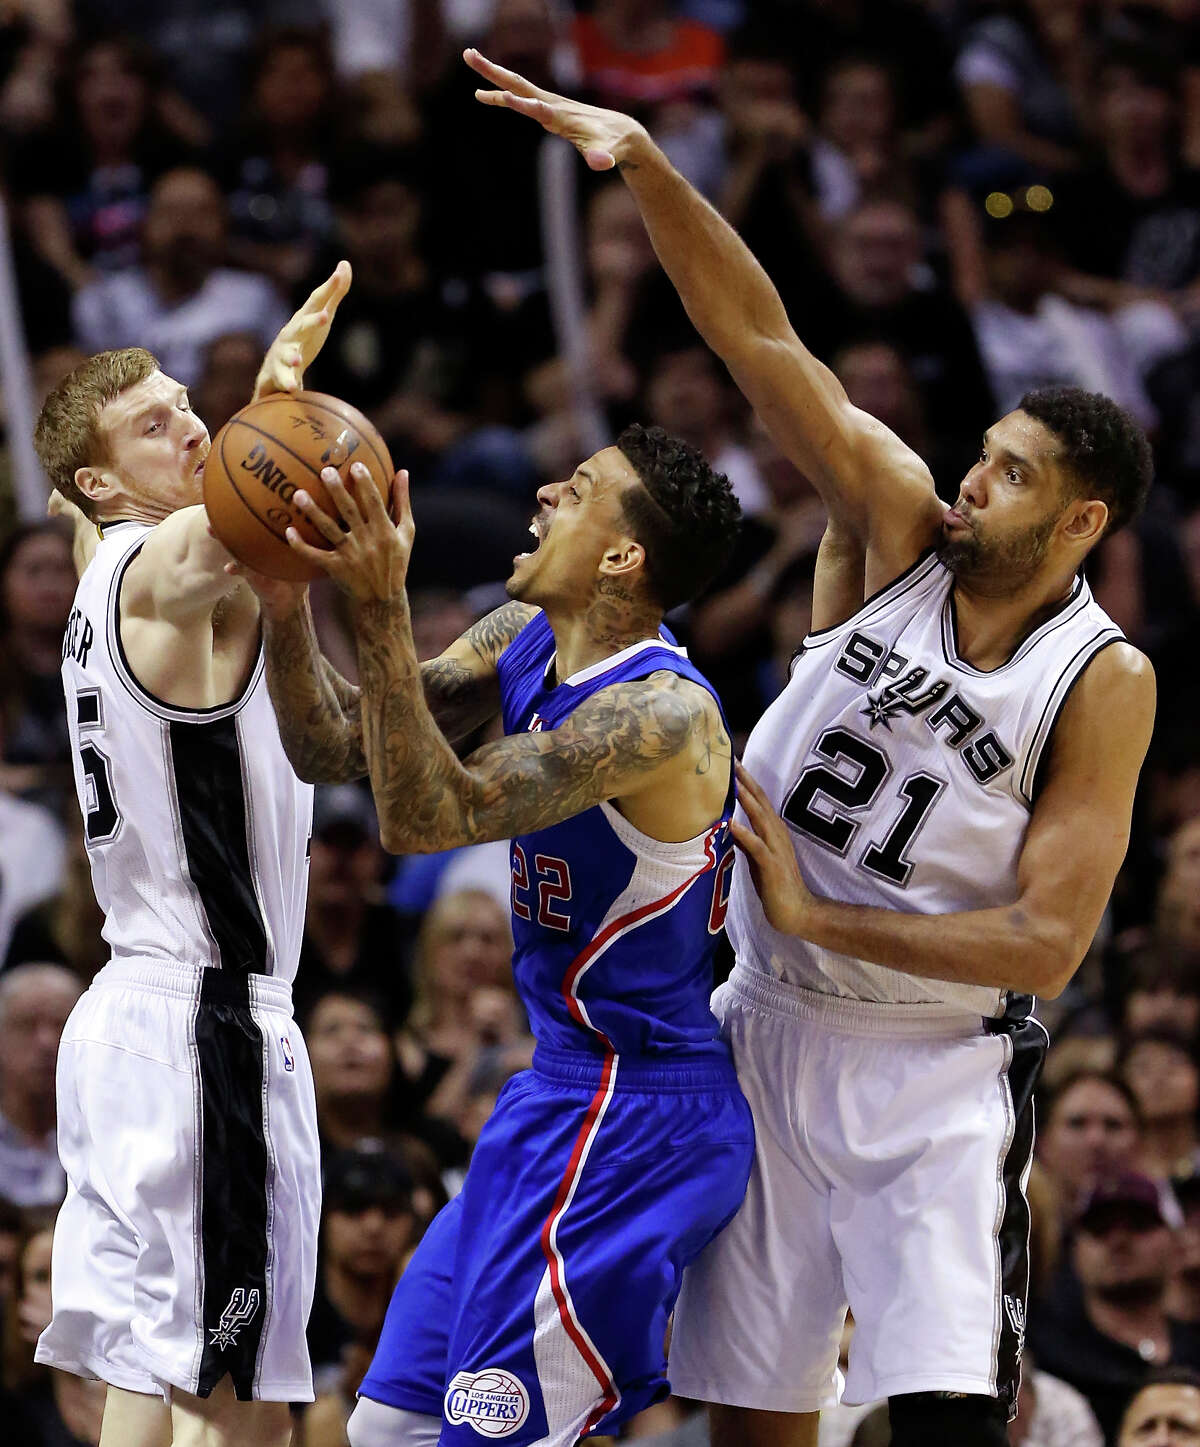 San Antonio Spurs' Matt Bonner and Tim Duncan defend Los Angeles Clippers' Matt Barnes during second half action of Game 4 in the Western Conference playoffs Sunday April 26, 2015 at the AT&T Center. The Clippers won 114-105.